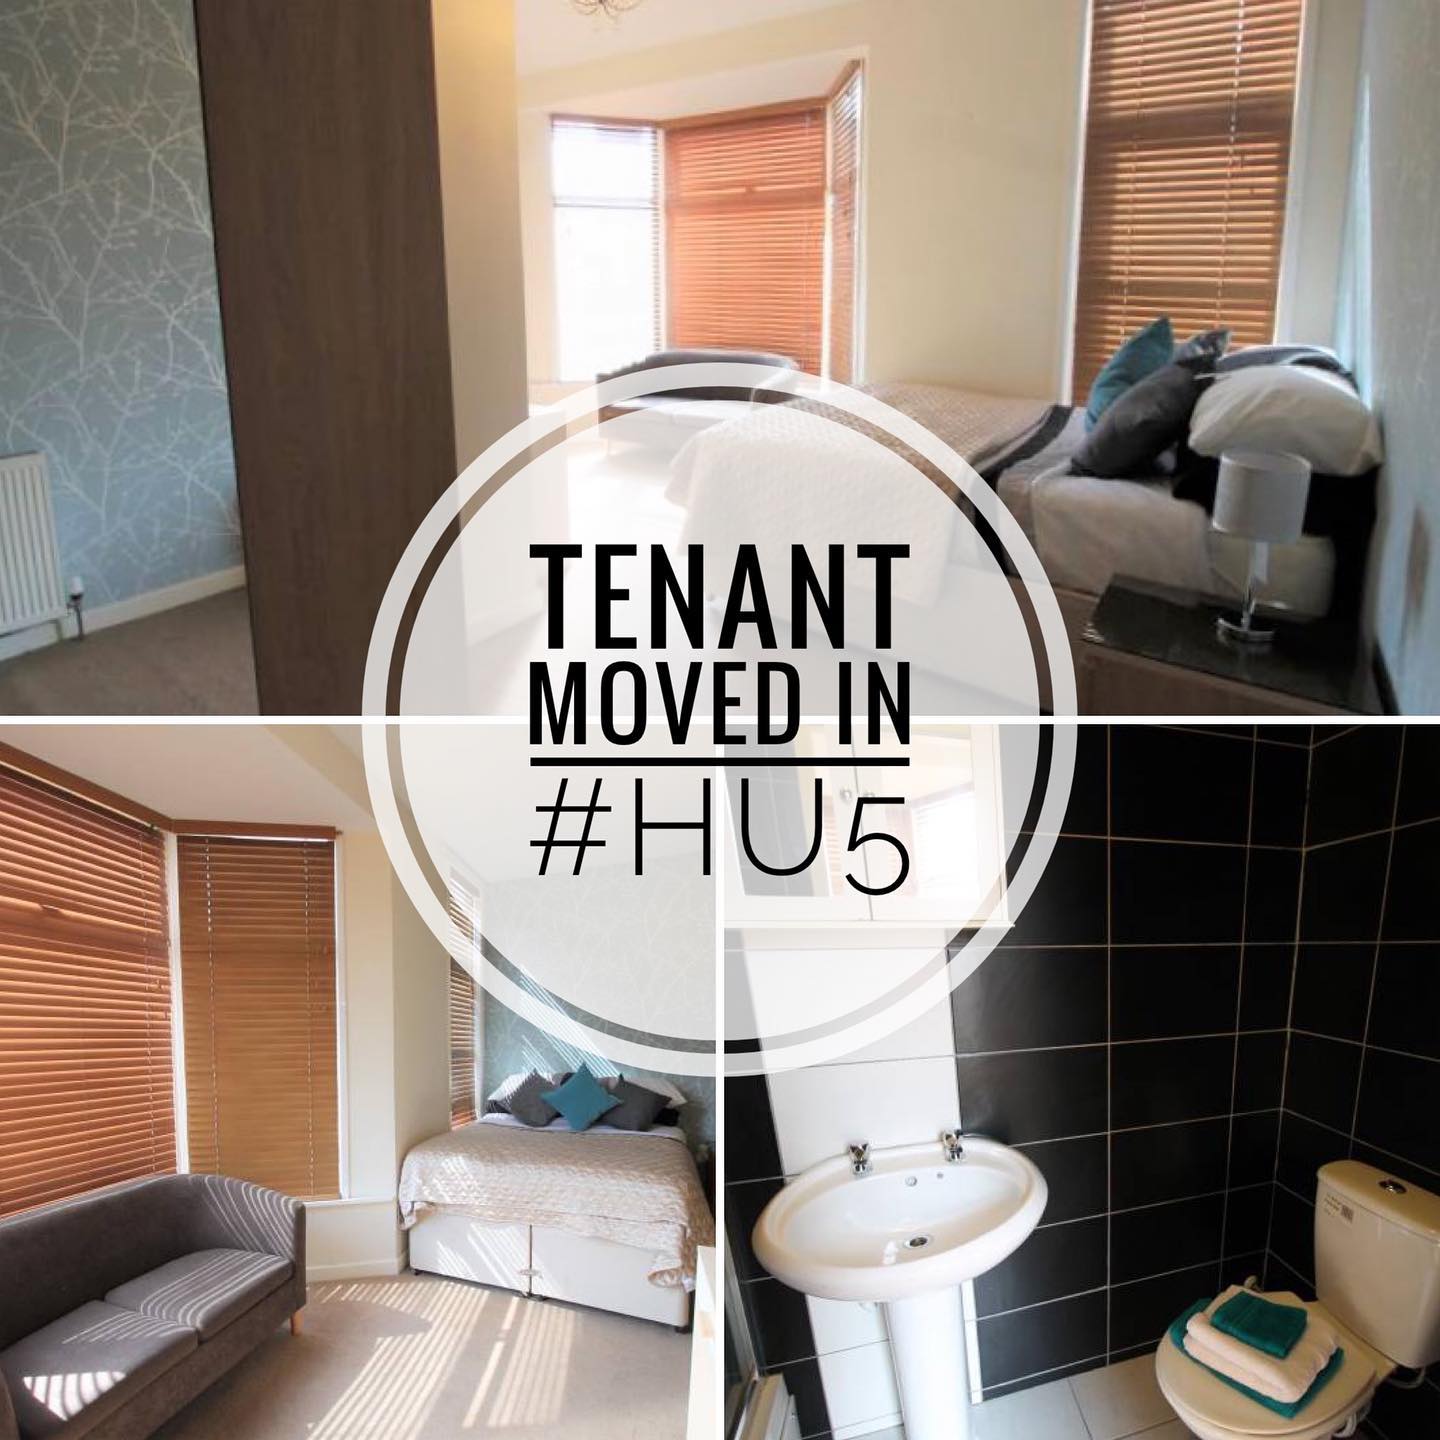 New Years resolution is to post more on social media! So to kick things off.. tenant checked in today to this affordable six bedroom professional houseshare.. we still have one room available here so get in touch to view! #hu5 #houseshare #lettinghull